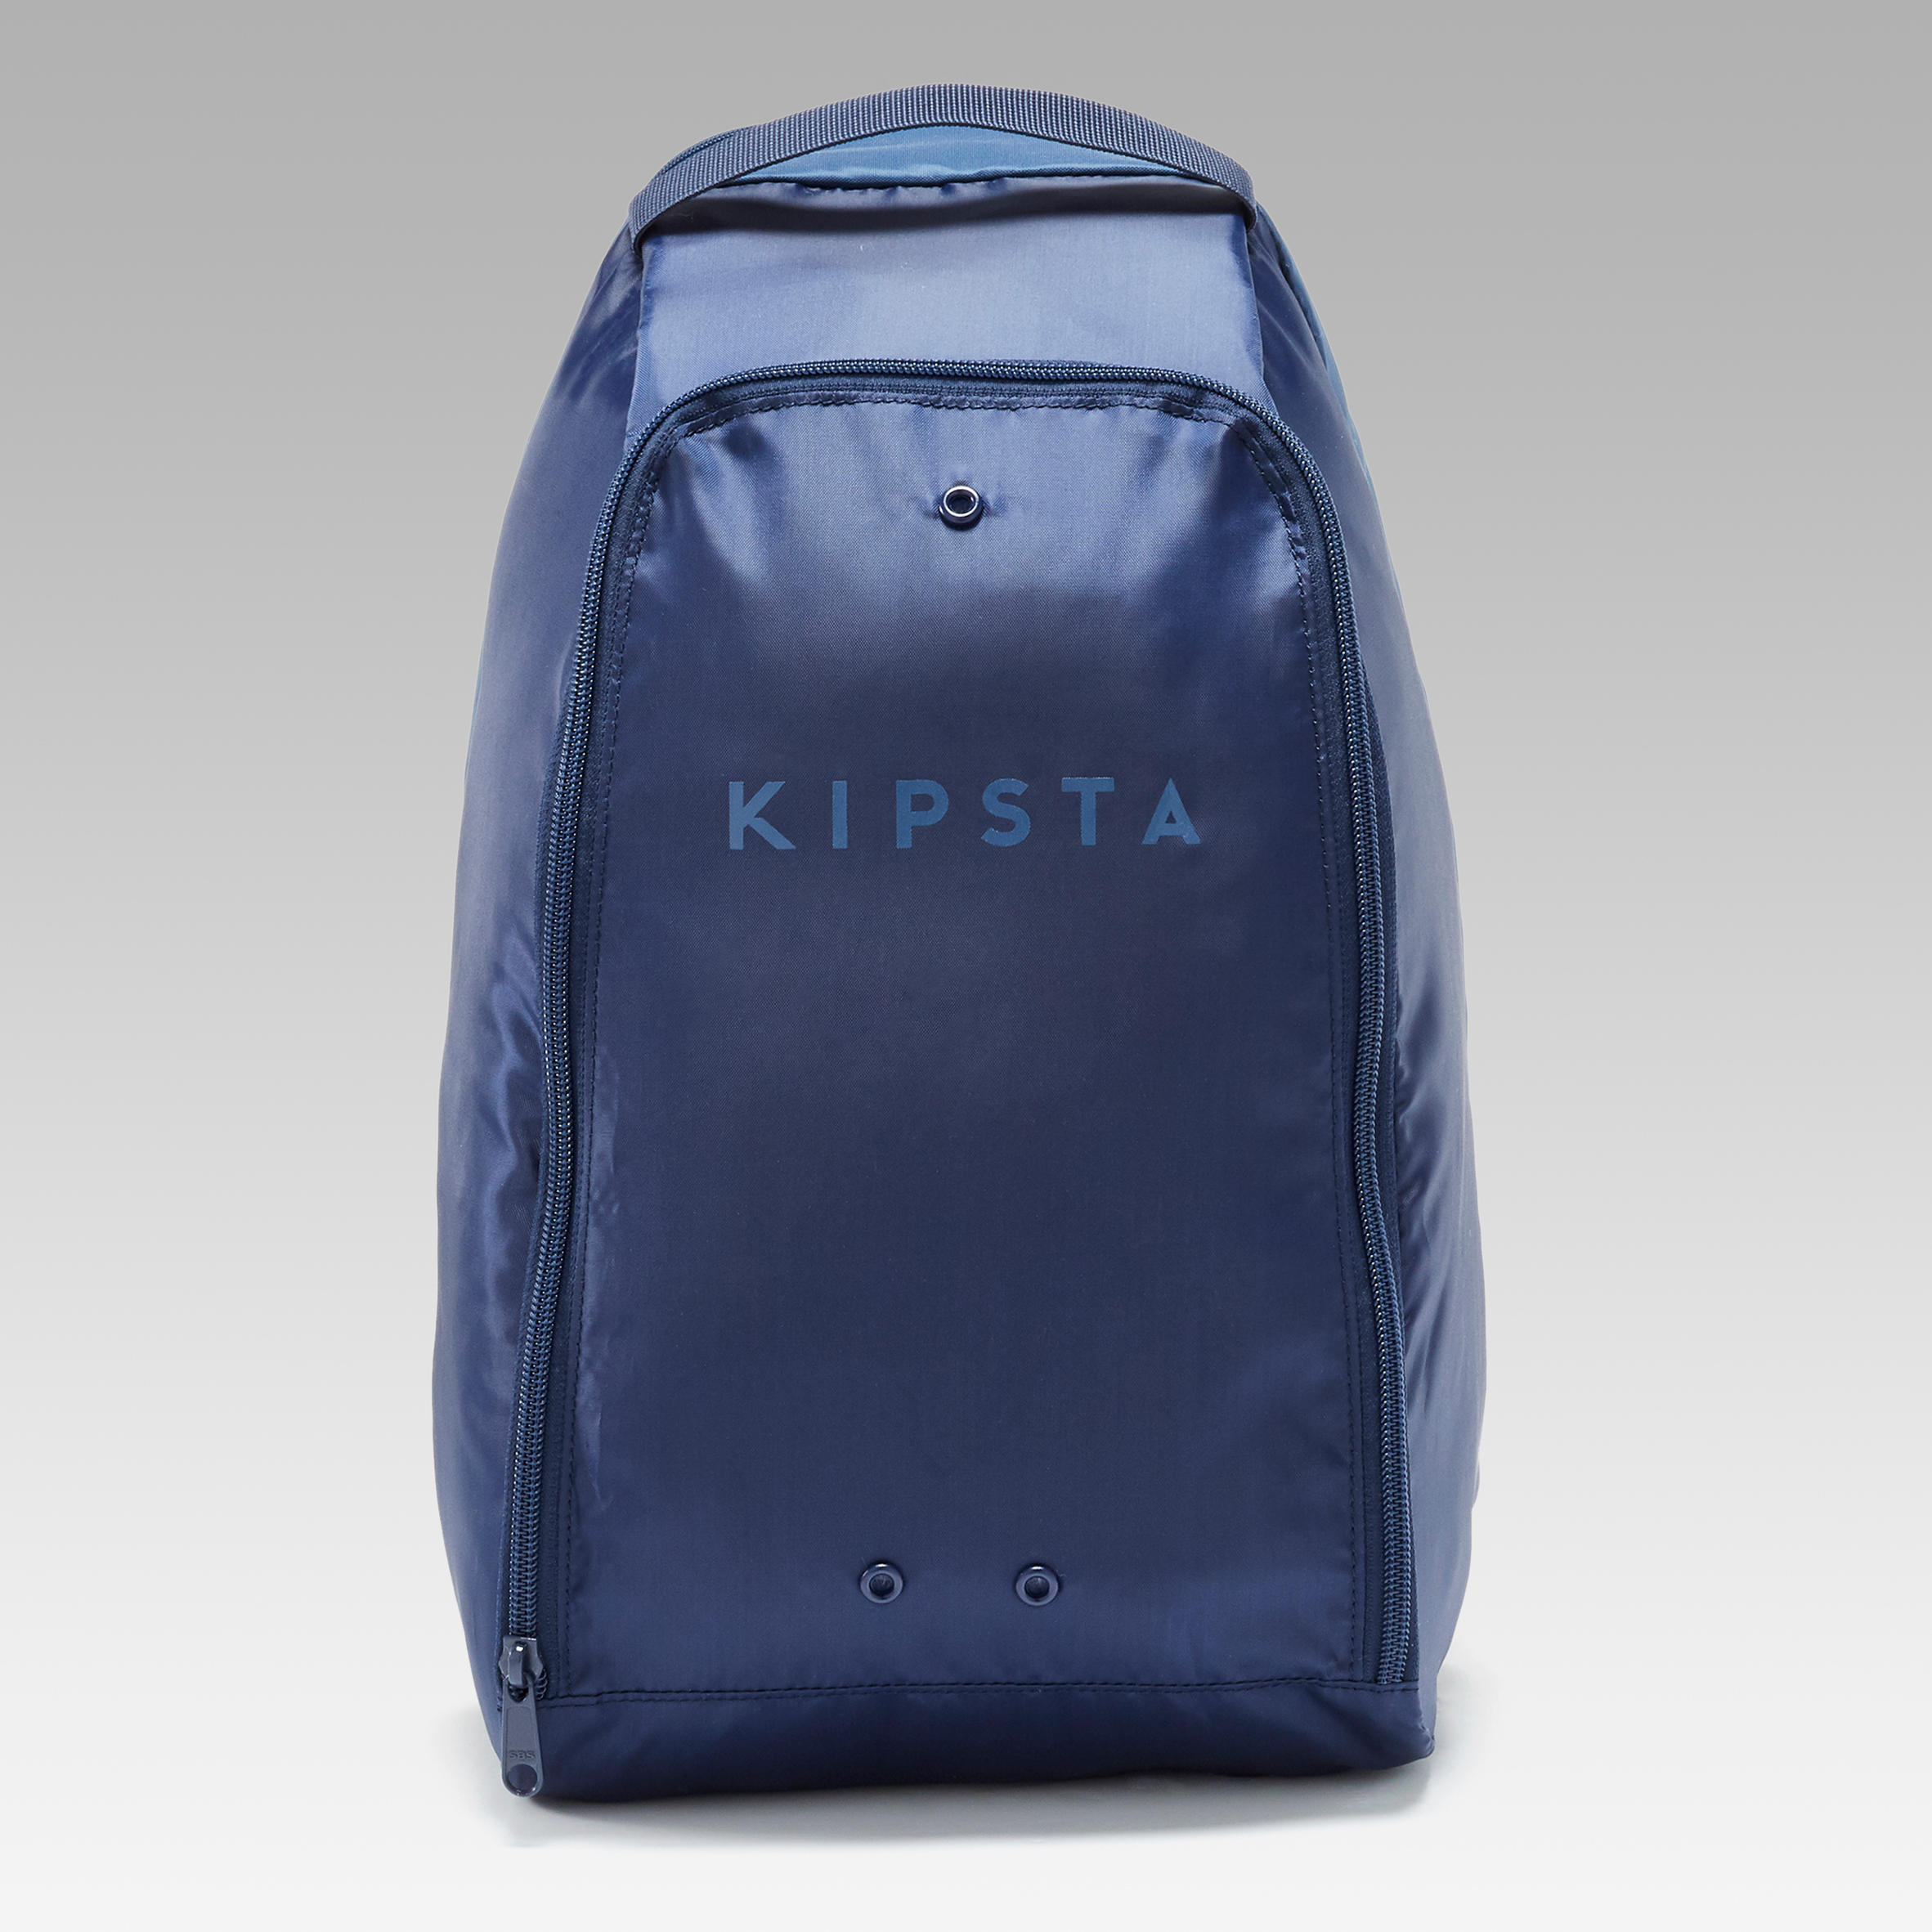 Kipsta By Decathlon Unisex Navy Blue & Red Brand Logo Sports Backpack Price  in India, Full Specifications & Offers | DTashion.com